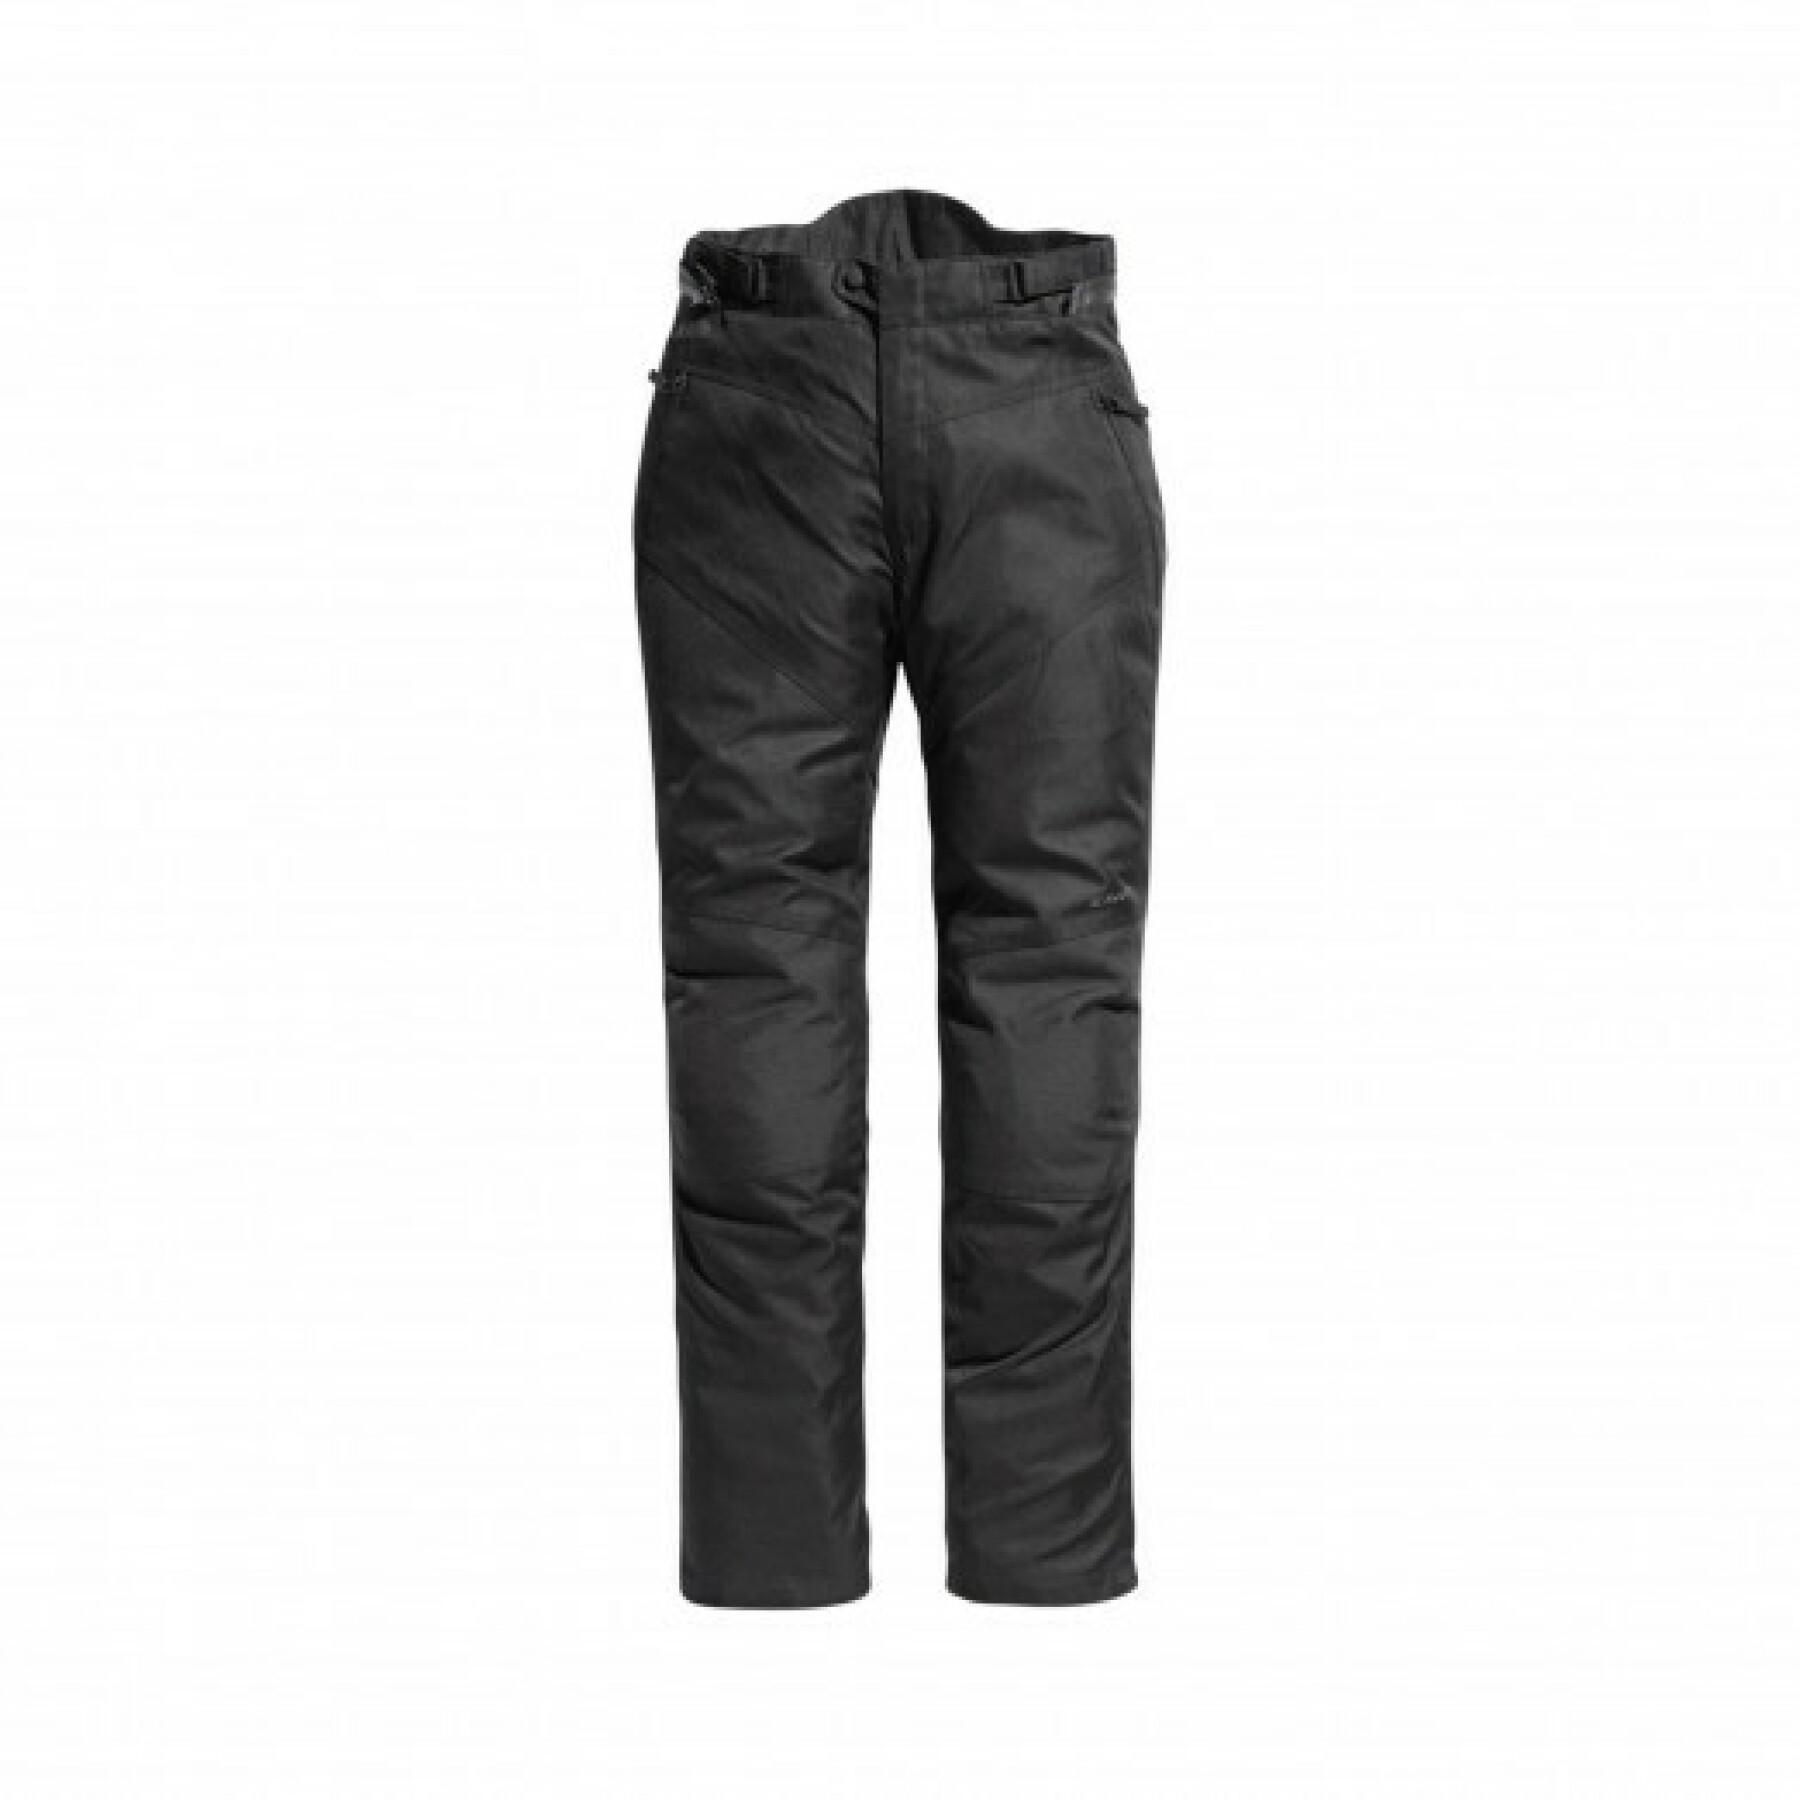 Women's motorcycle pants Difi tricky